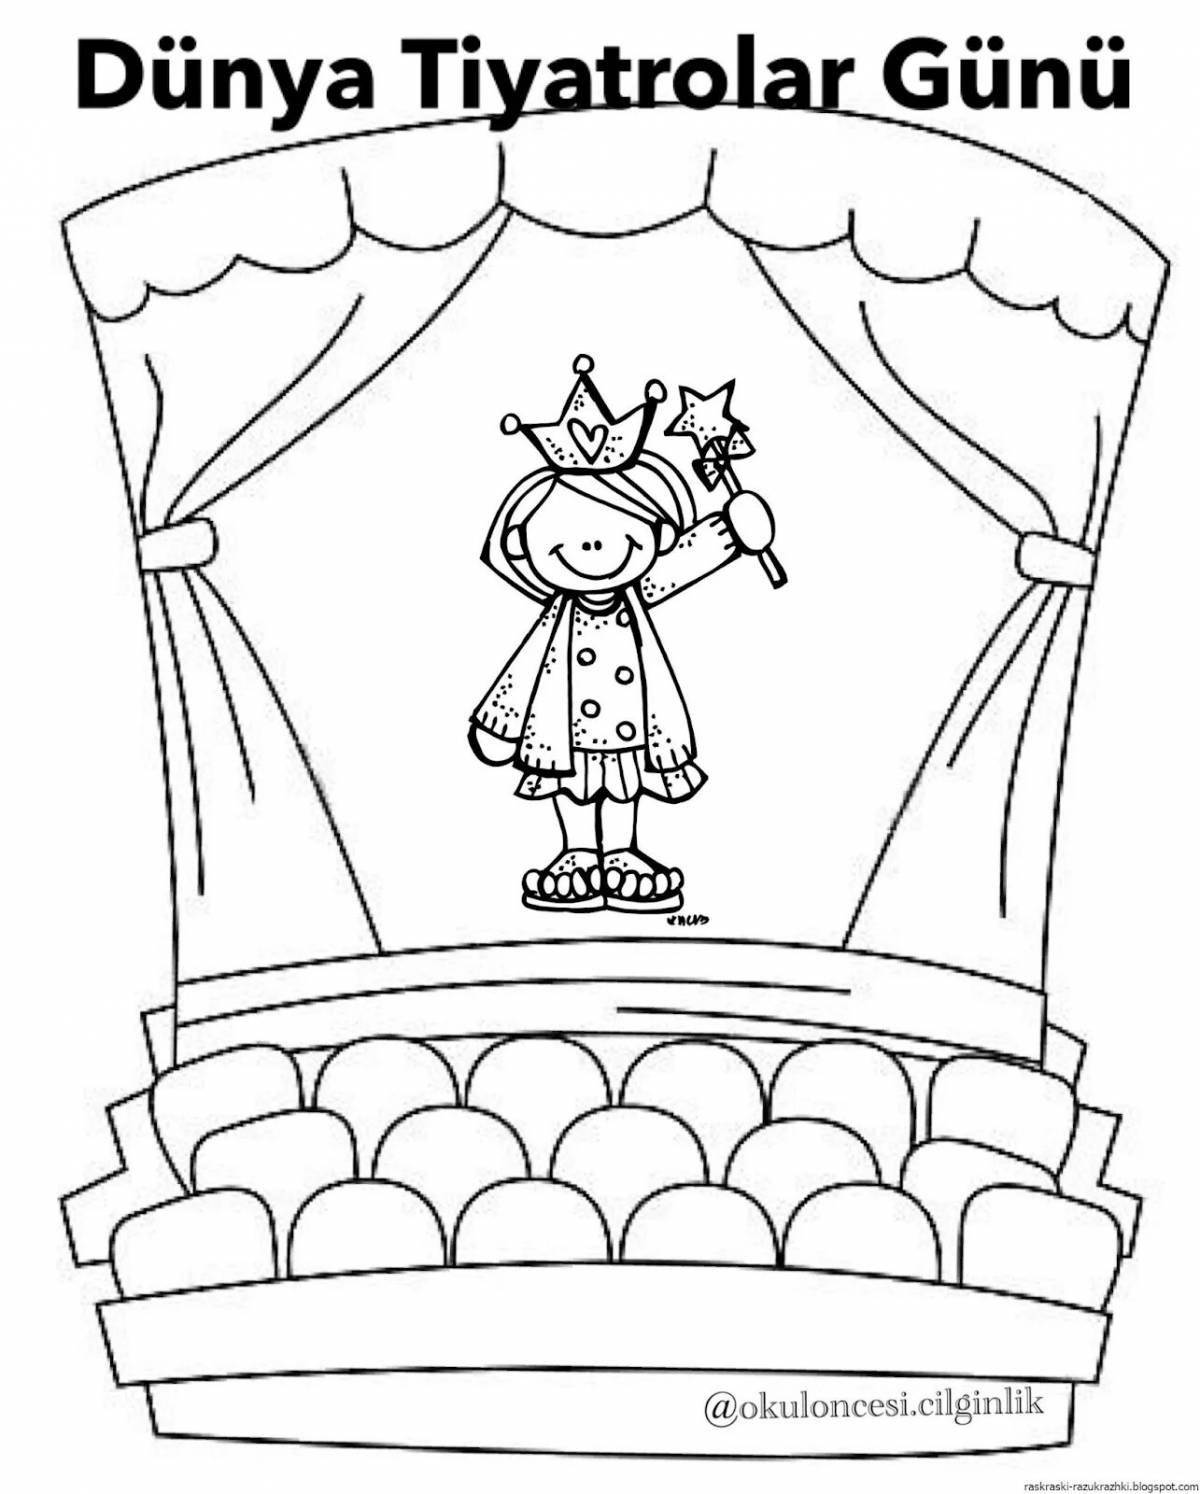 Exciting puppet theater